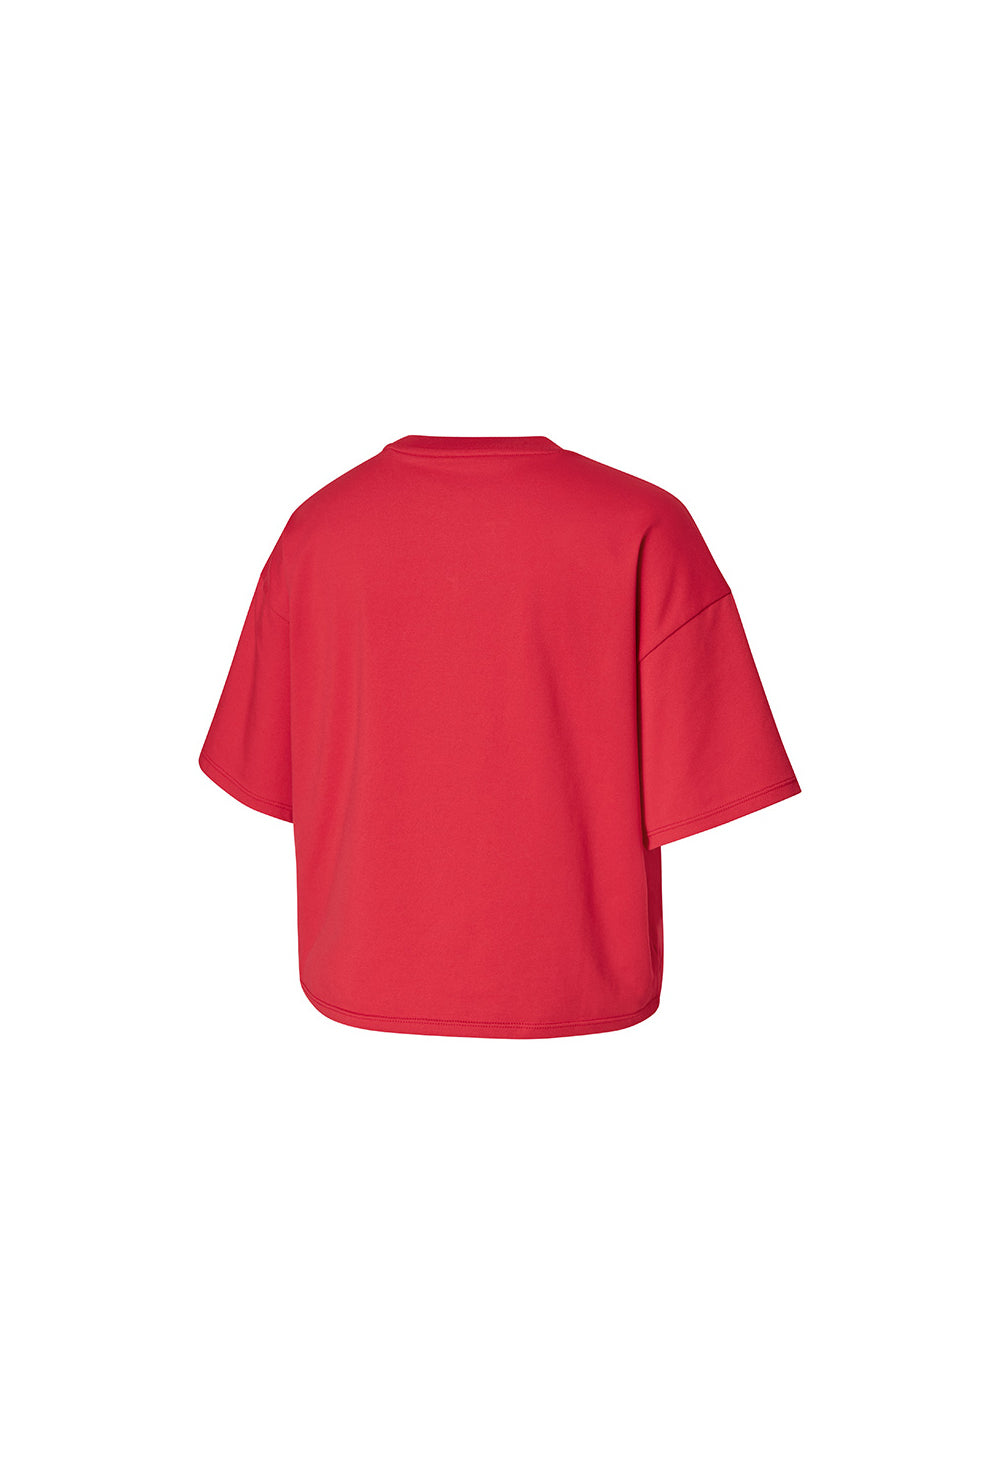 Cool Touch Basic Crop T-Shirt - Pepper Red (Clearance)